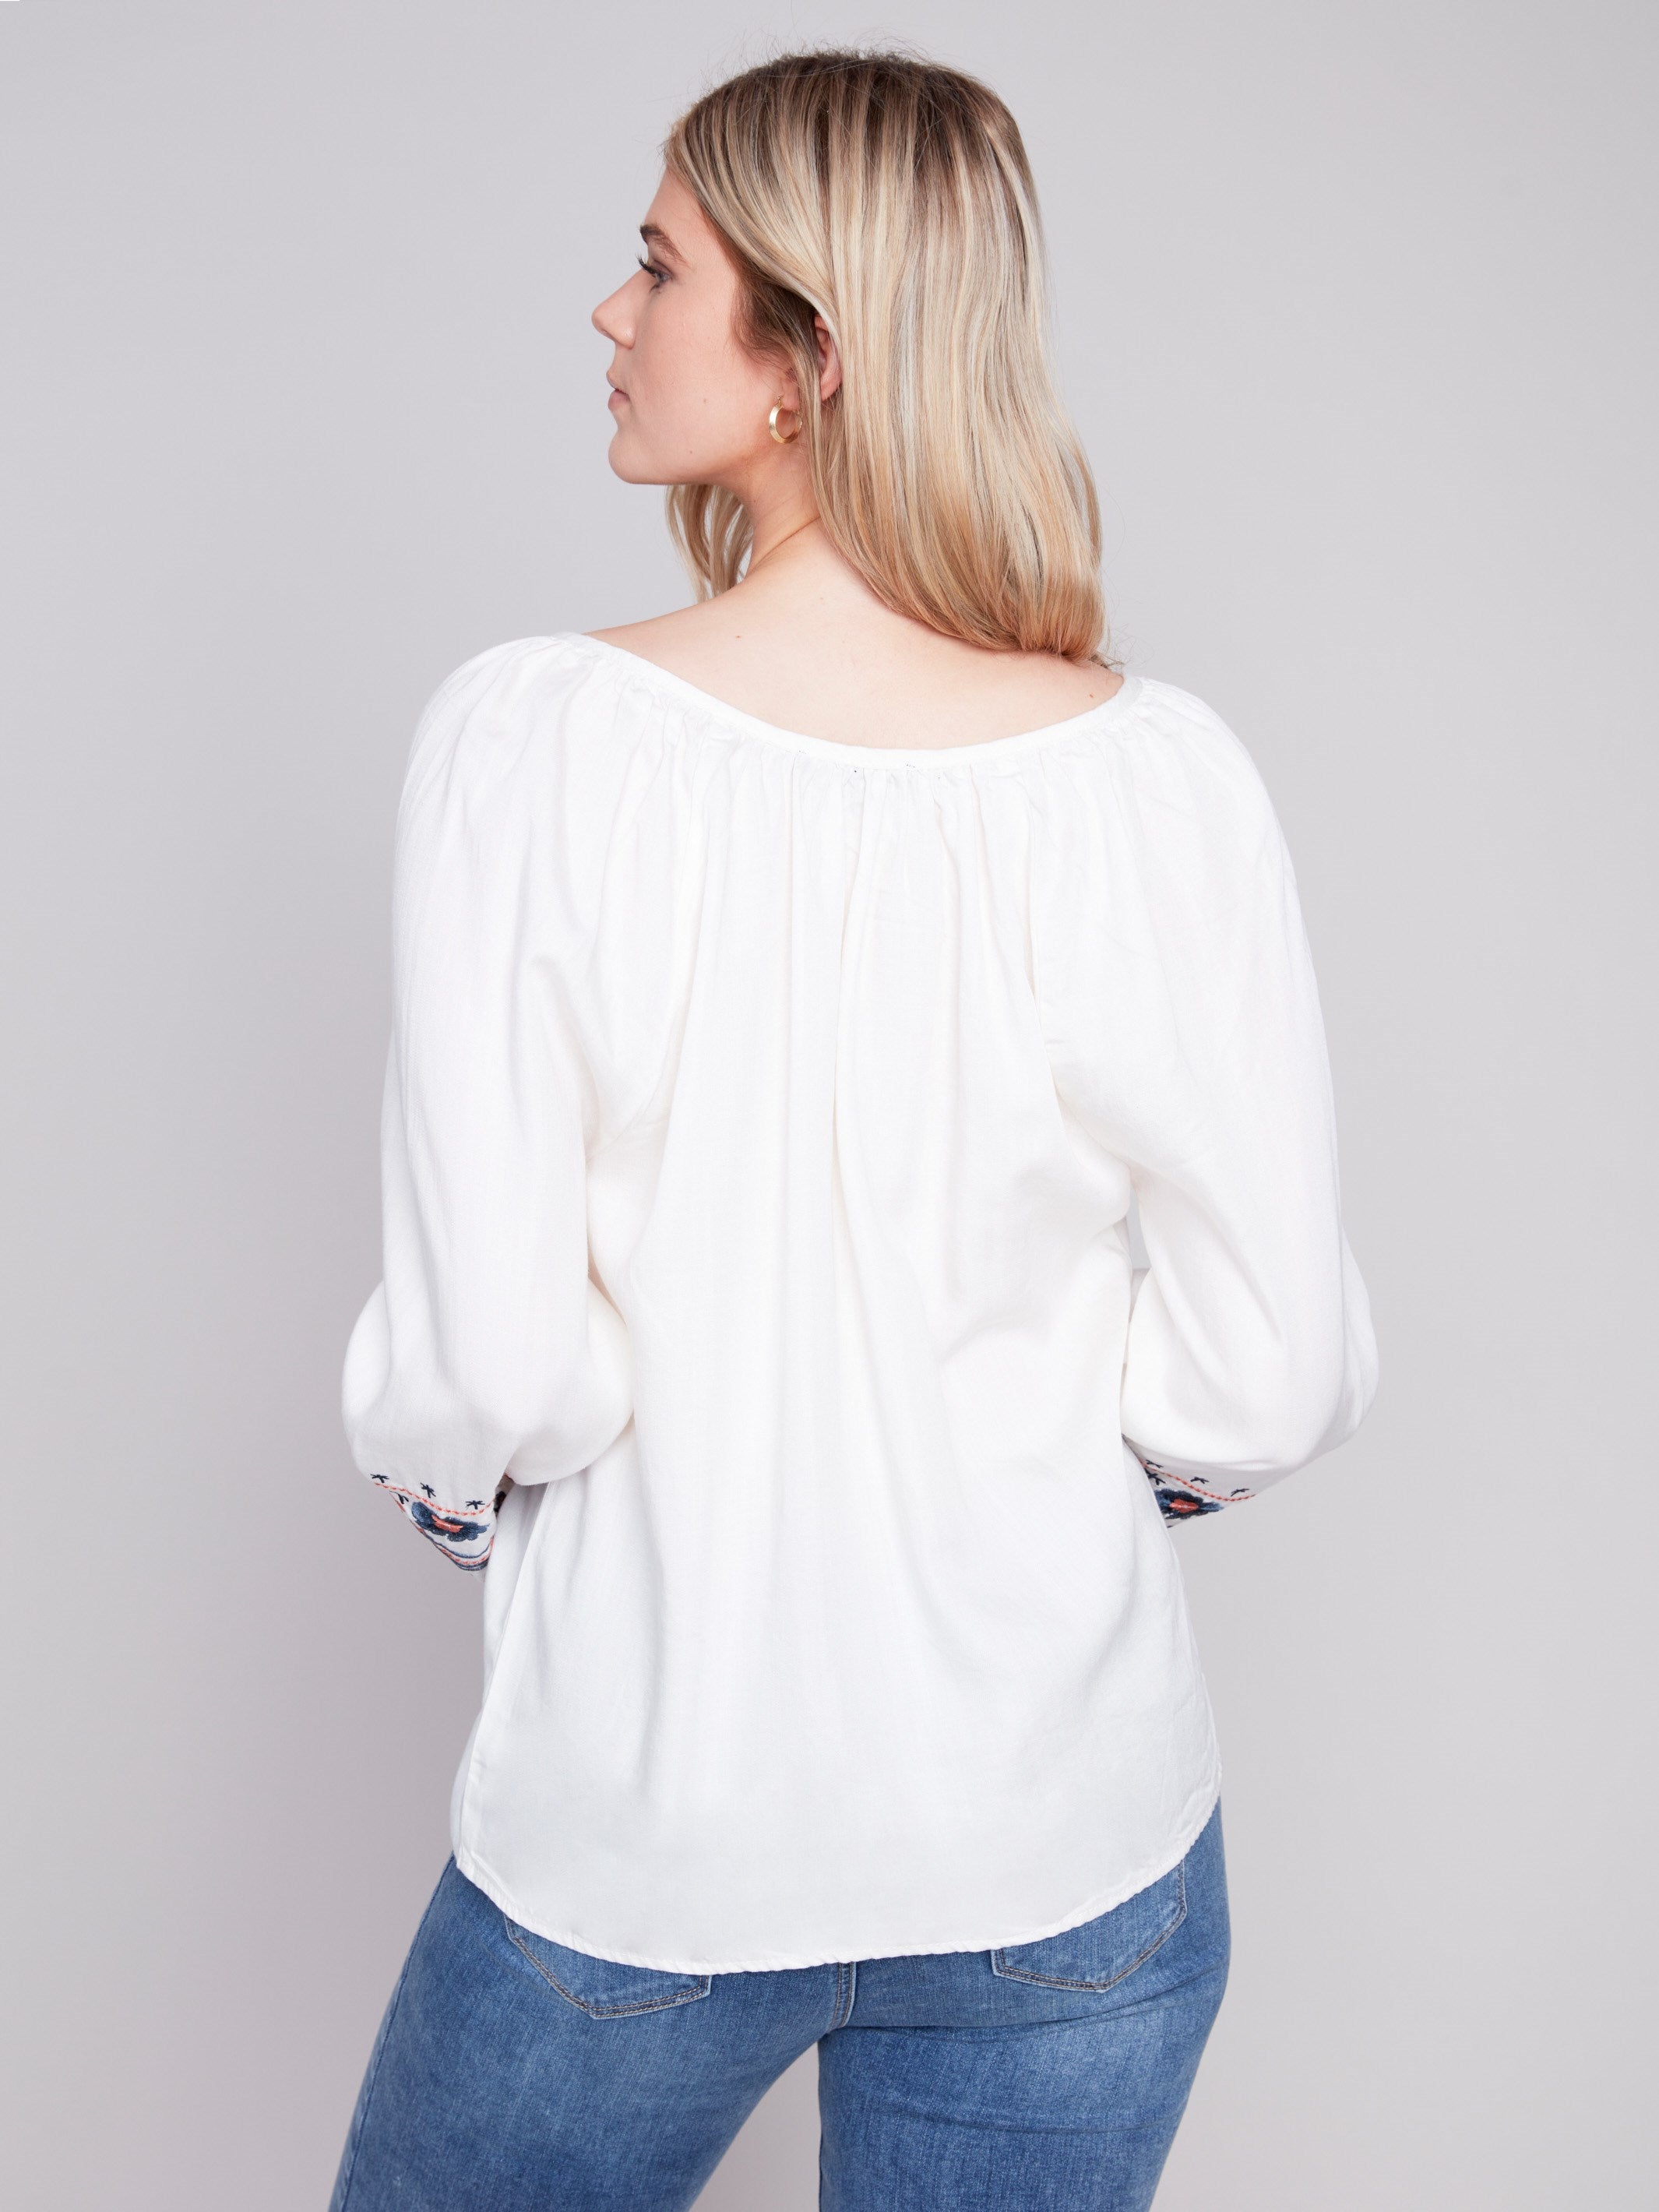 Embroidered Tencel Blouse - White - Charlie B Collection Canada - Image 2